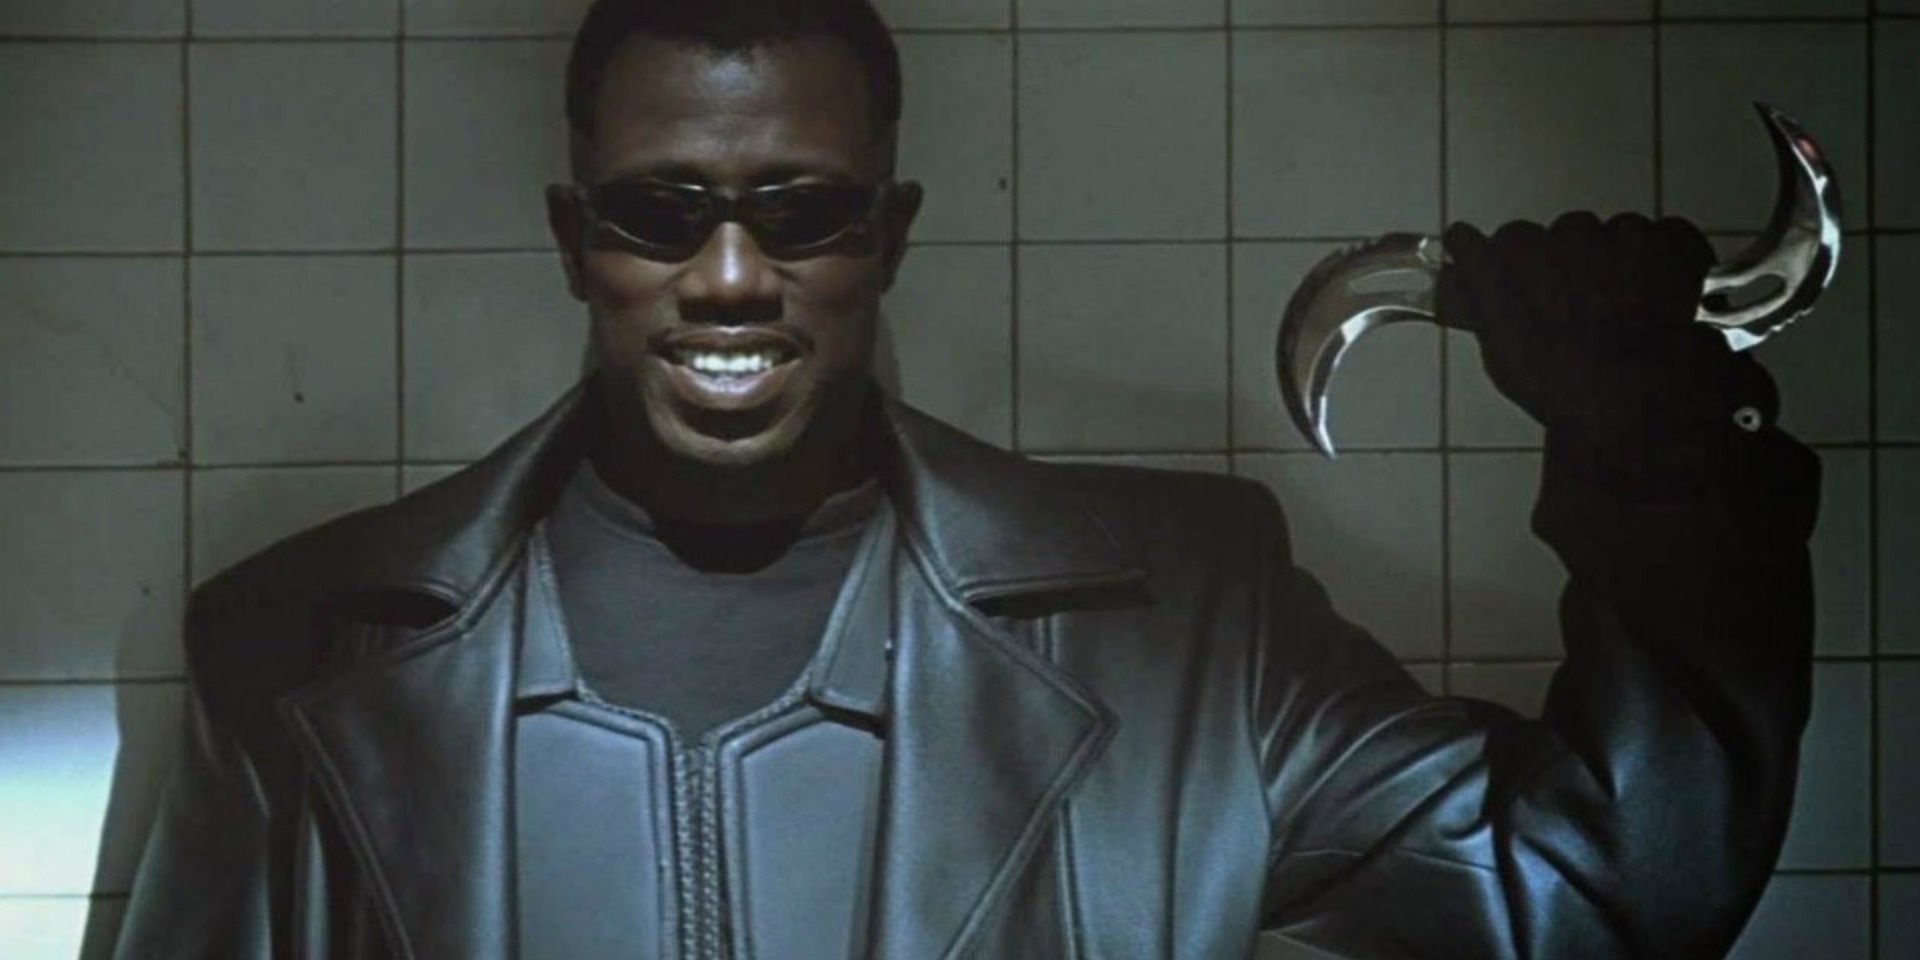 Blade holding up a weapon and smiling in Blade.